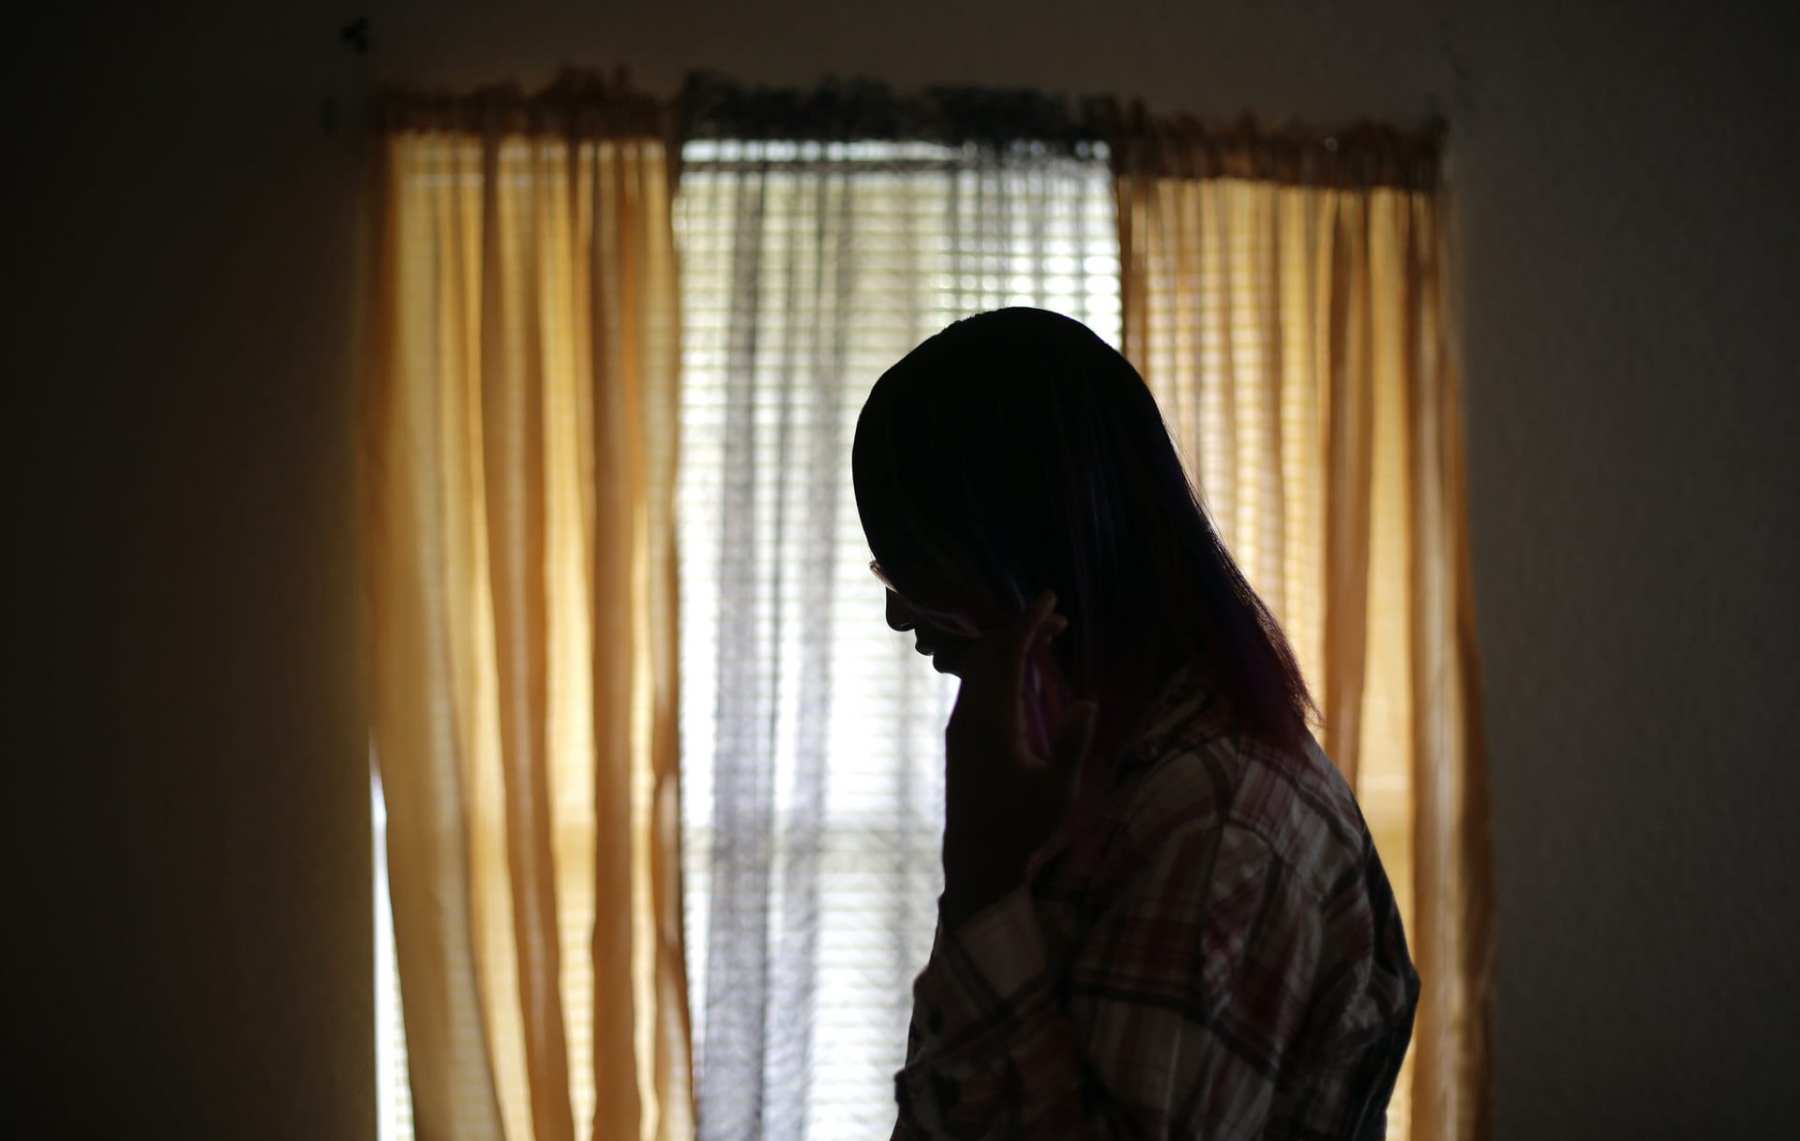 An outline of a transgender teen standing by the window. Her face is hidden.